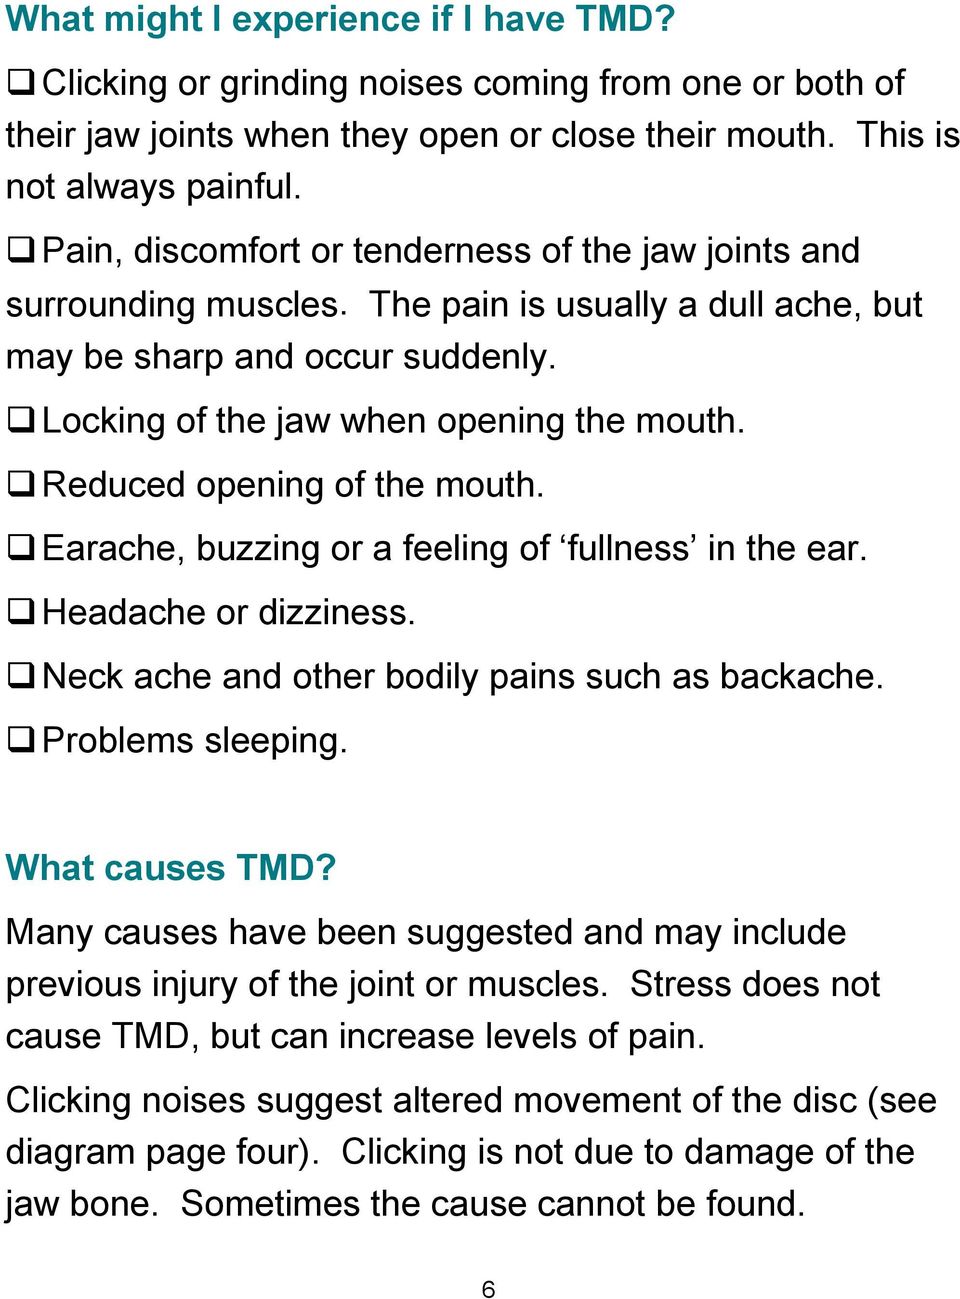 Reduced opening of the mouth. Earache, buzzing or a feeling of fullness in the ear. Headache or dizziness. Neck ache and other bodily pains such as backache. Problems sleeping. What causes TMD?